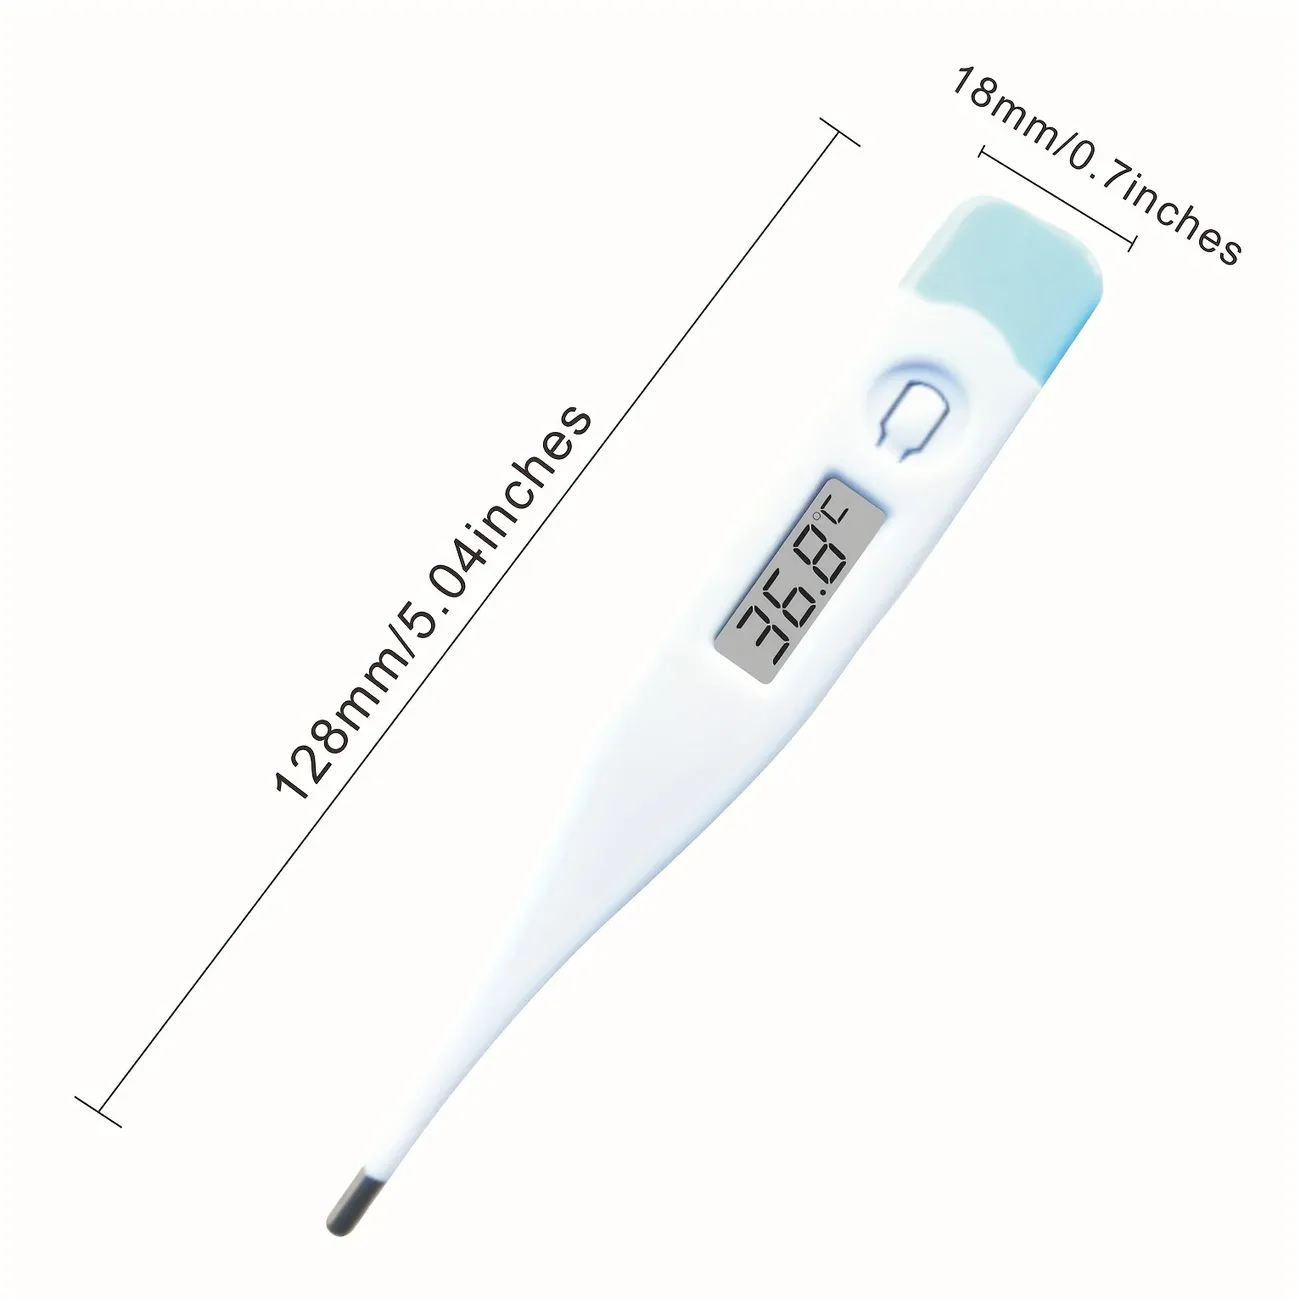 Digital Thermometer Good Clinical Oral Underarm Rectal, Test Baby Adult Fever Temperature, Basal Digital Rigid Tip Smart Termometer - Spain